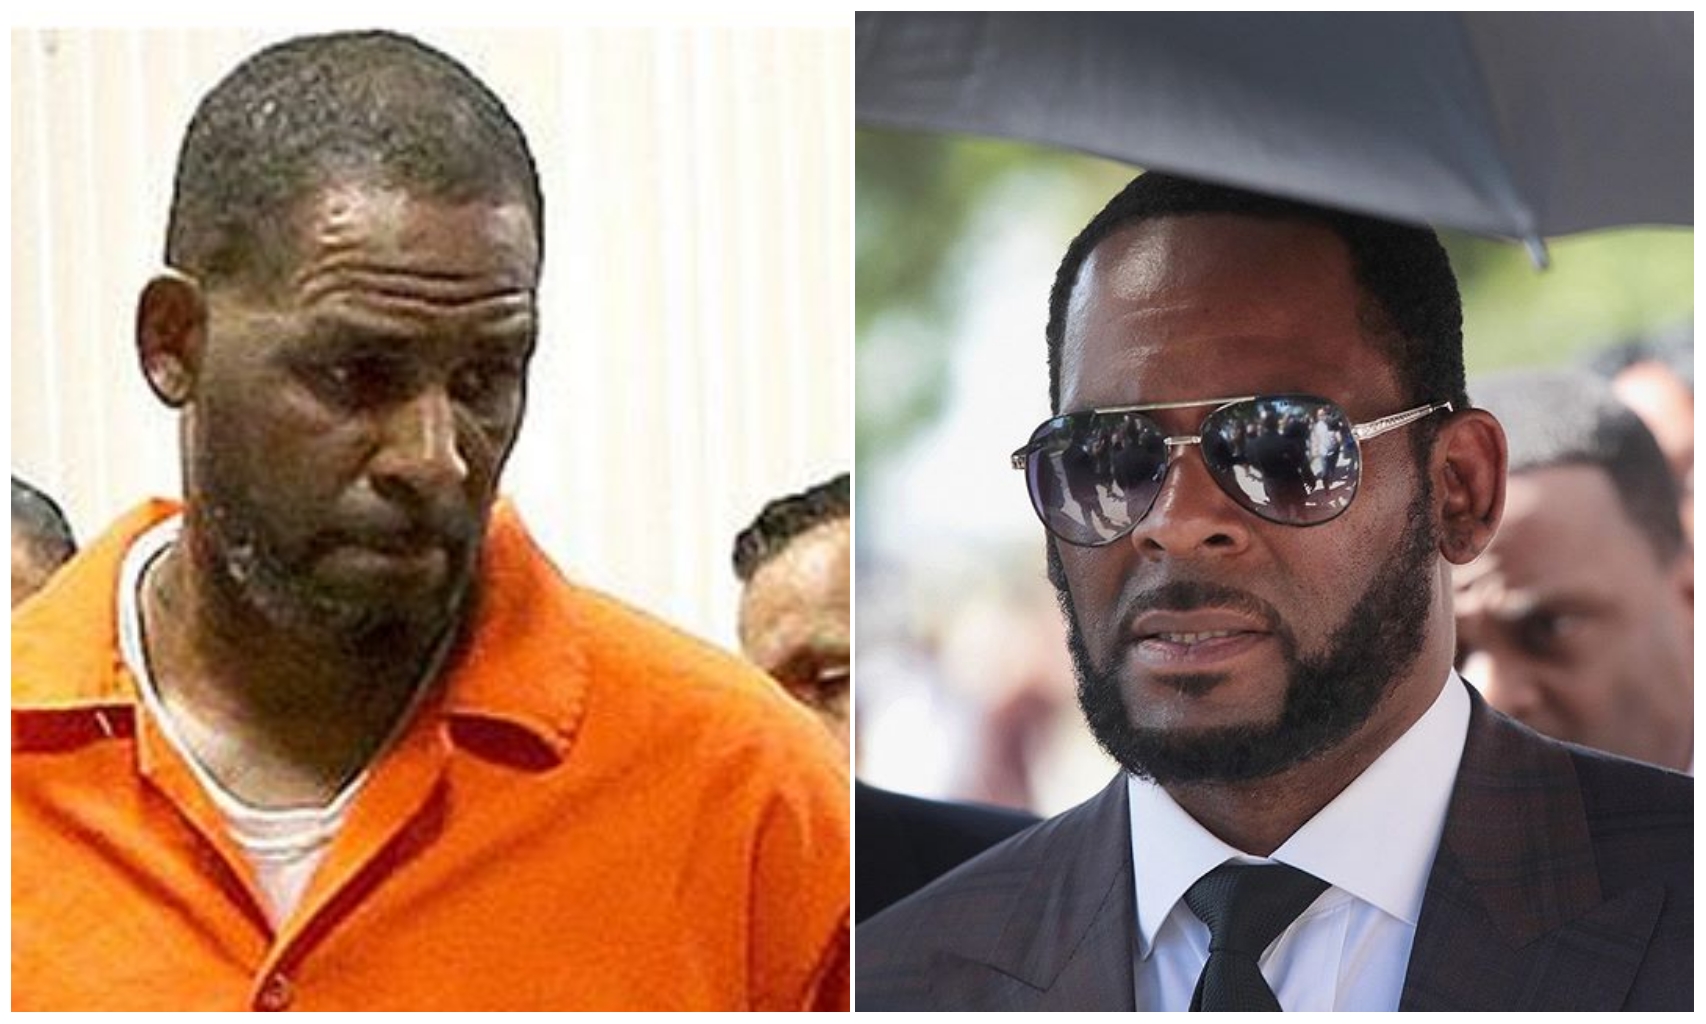 Judge denies R. Kelly’s latest bid for freedom after alleged jailhouse beating